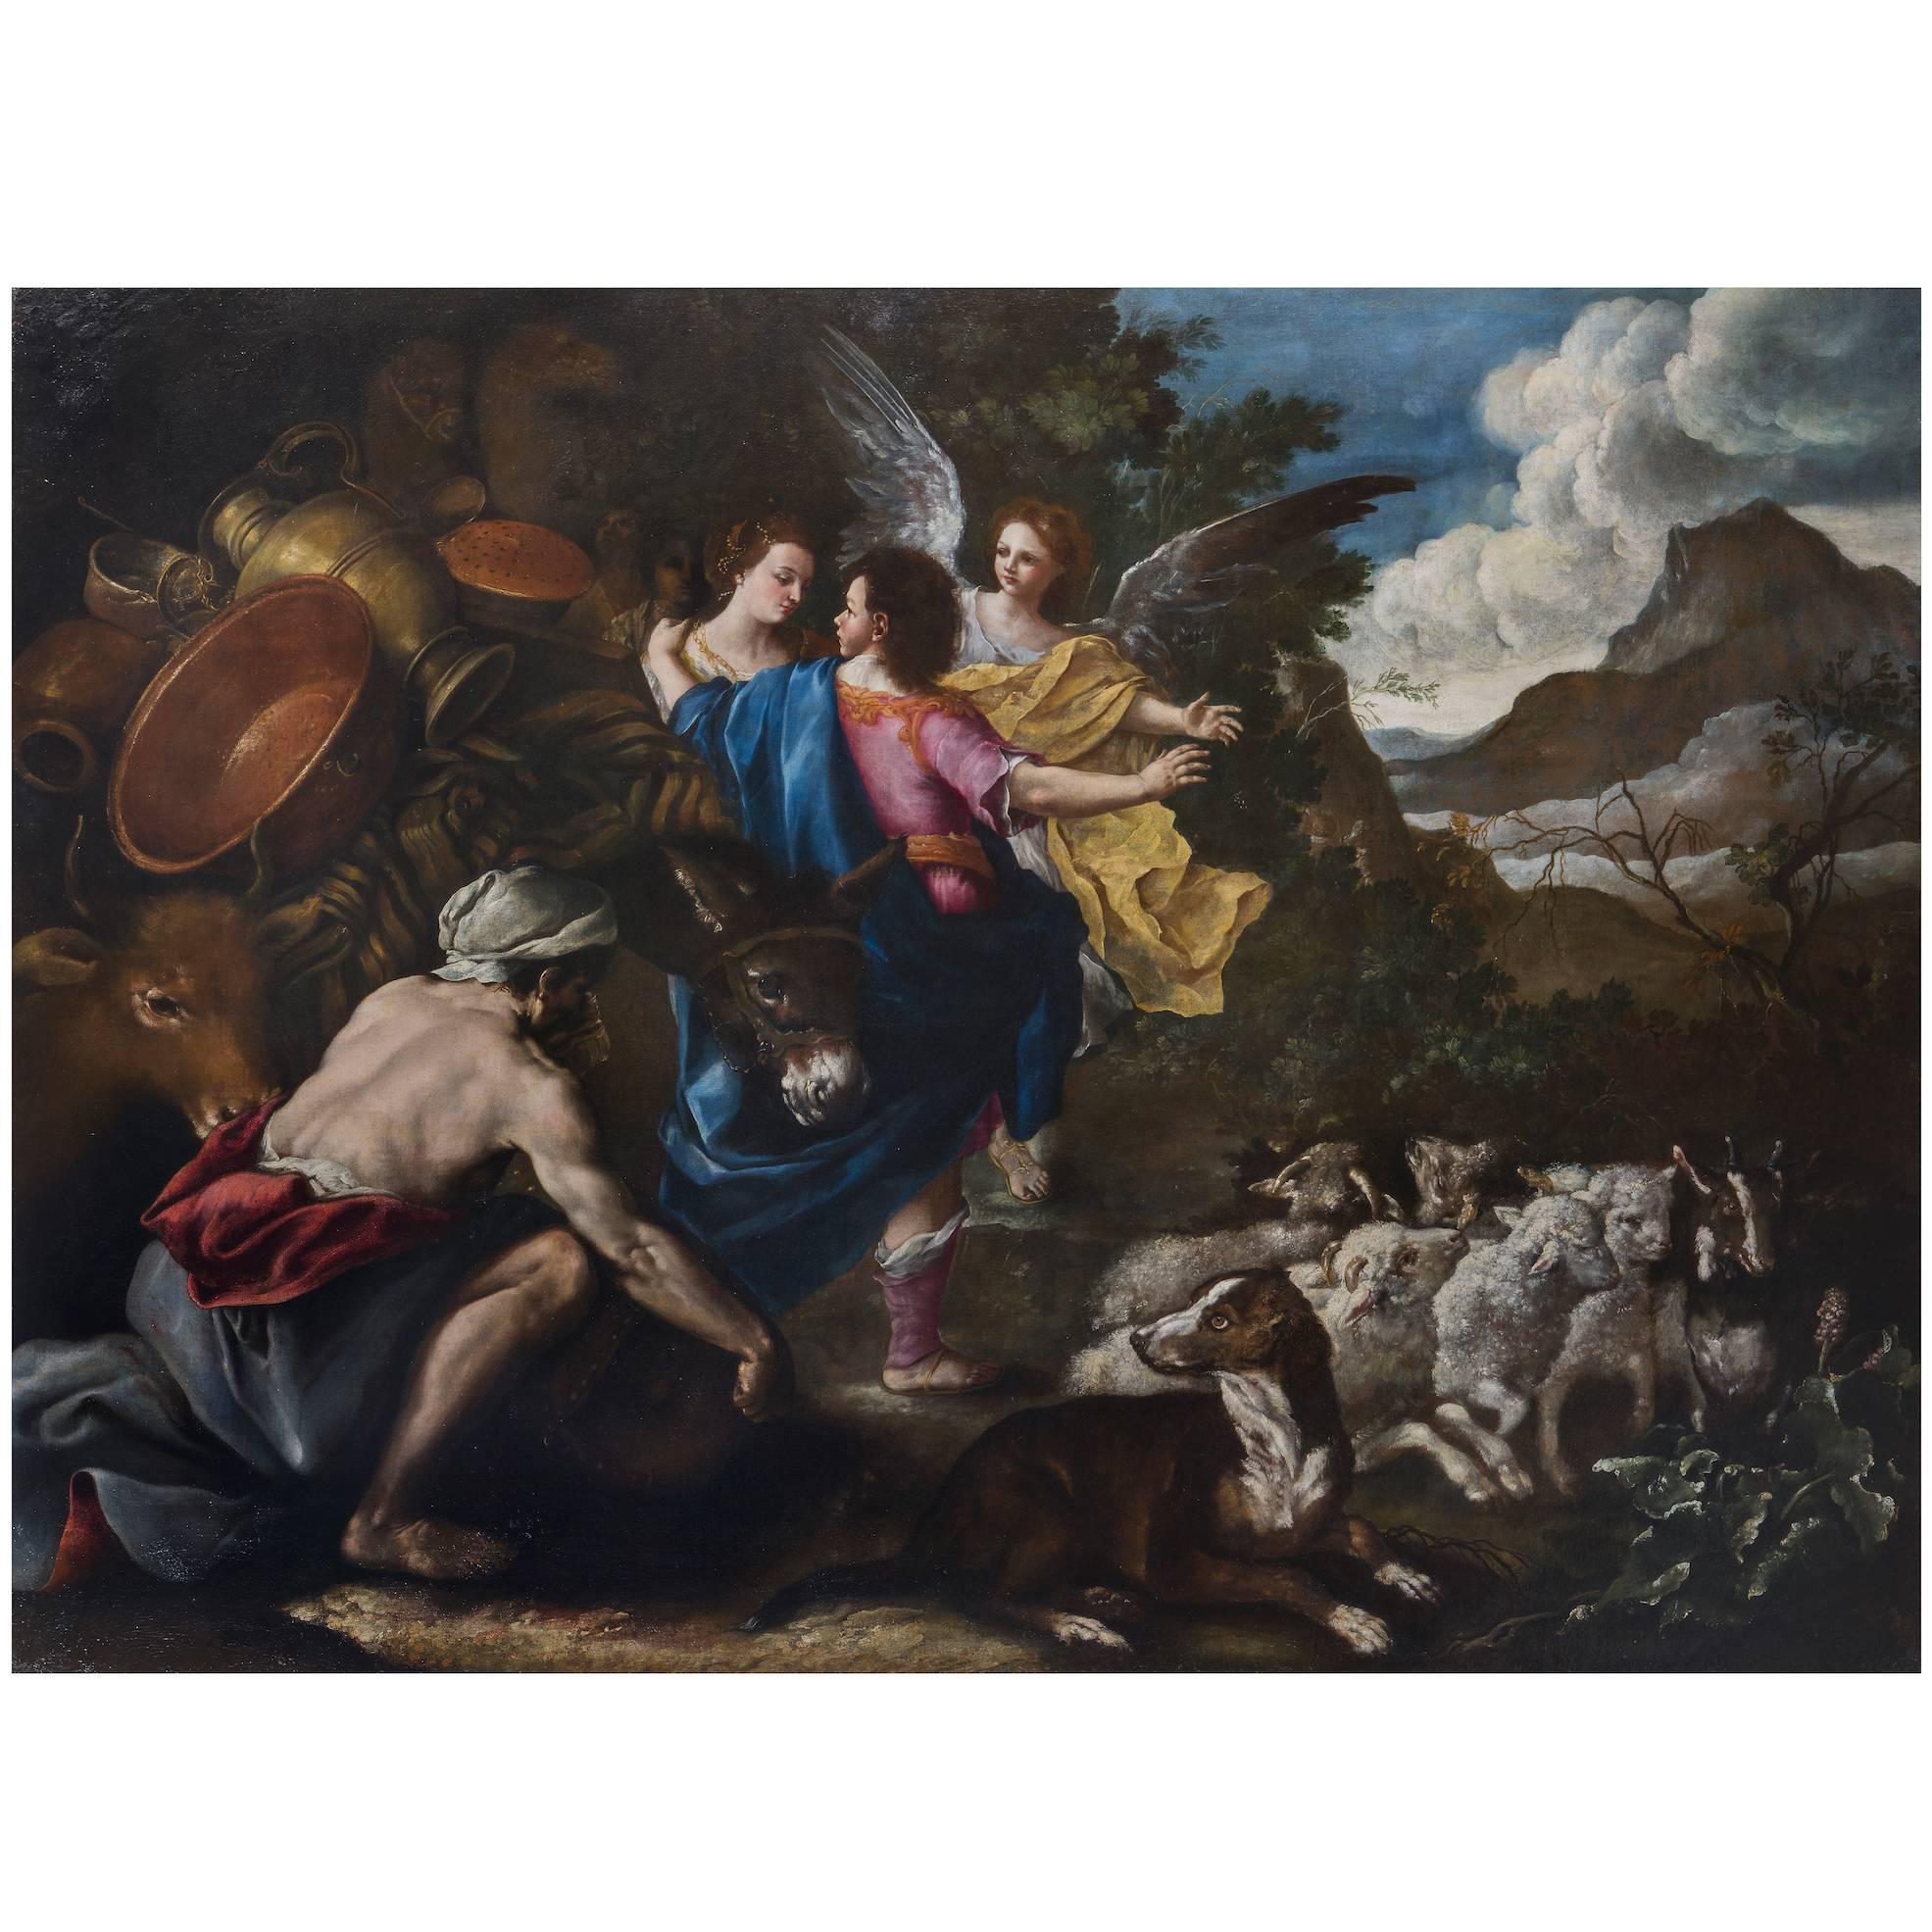 Domenico Guidobono, "the Journey of Rachel and Jacob" For Sale